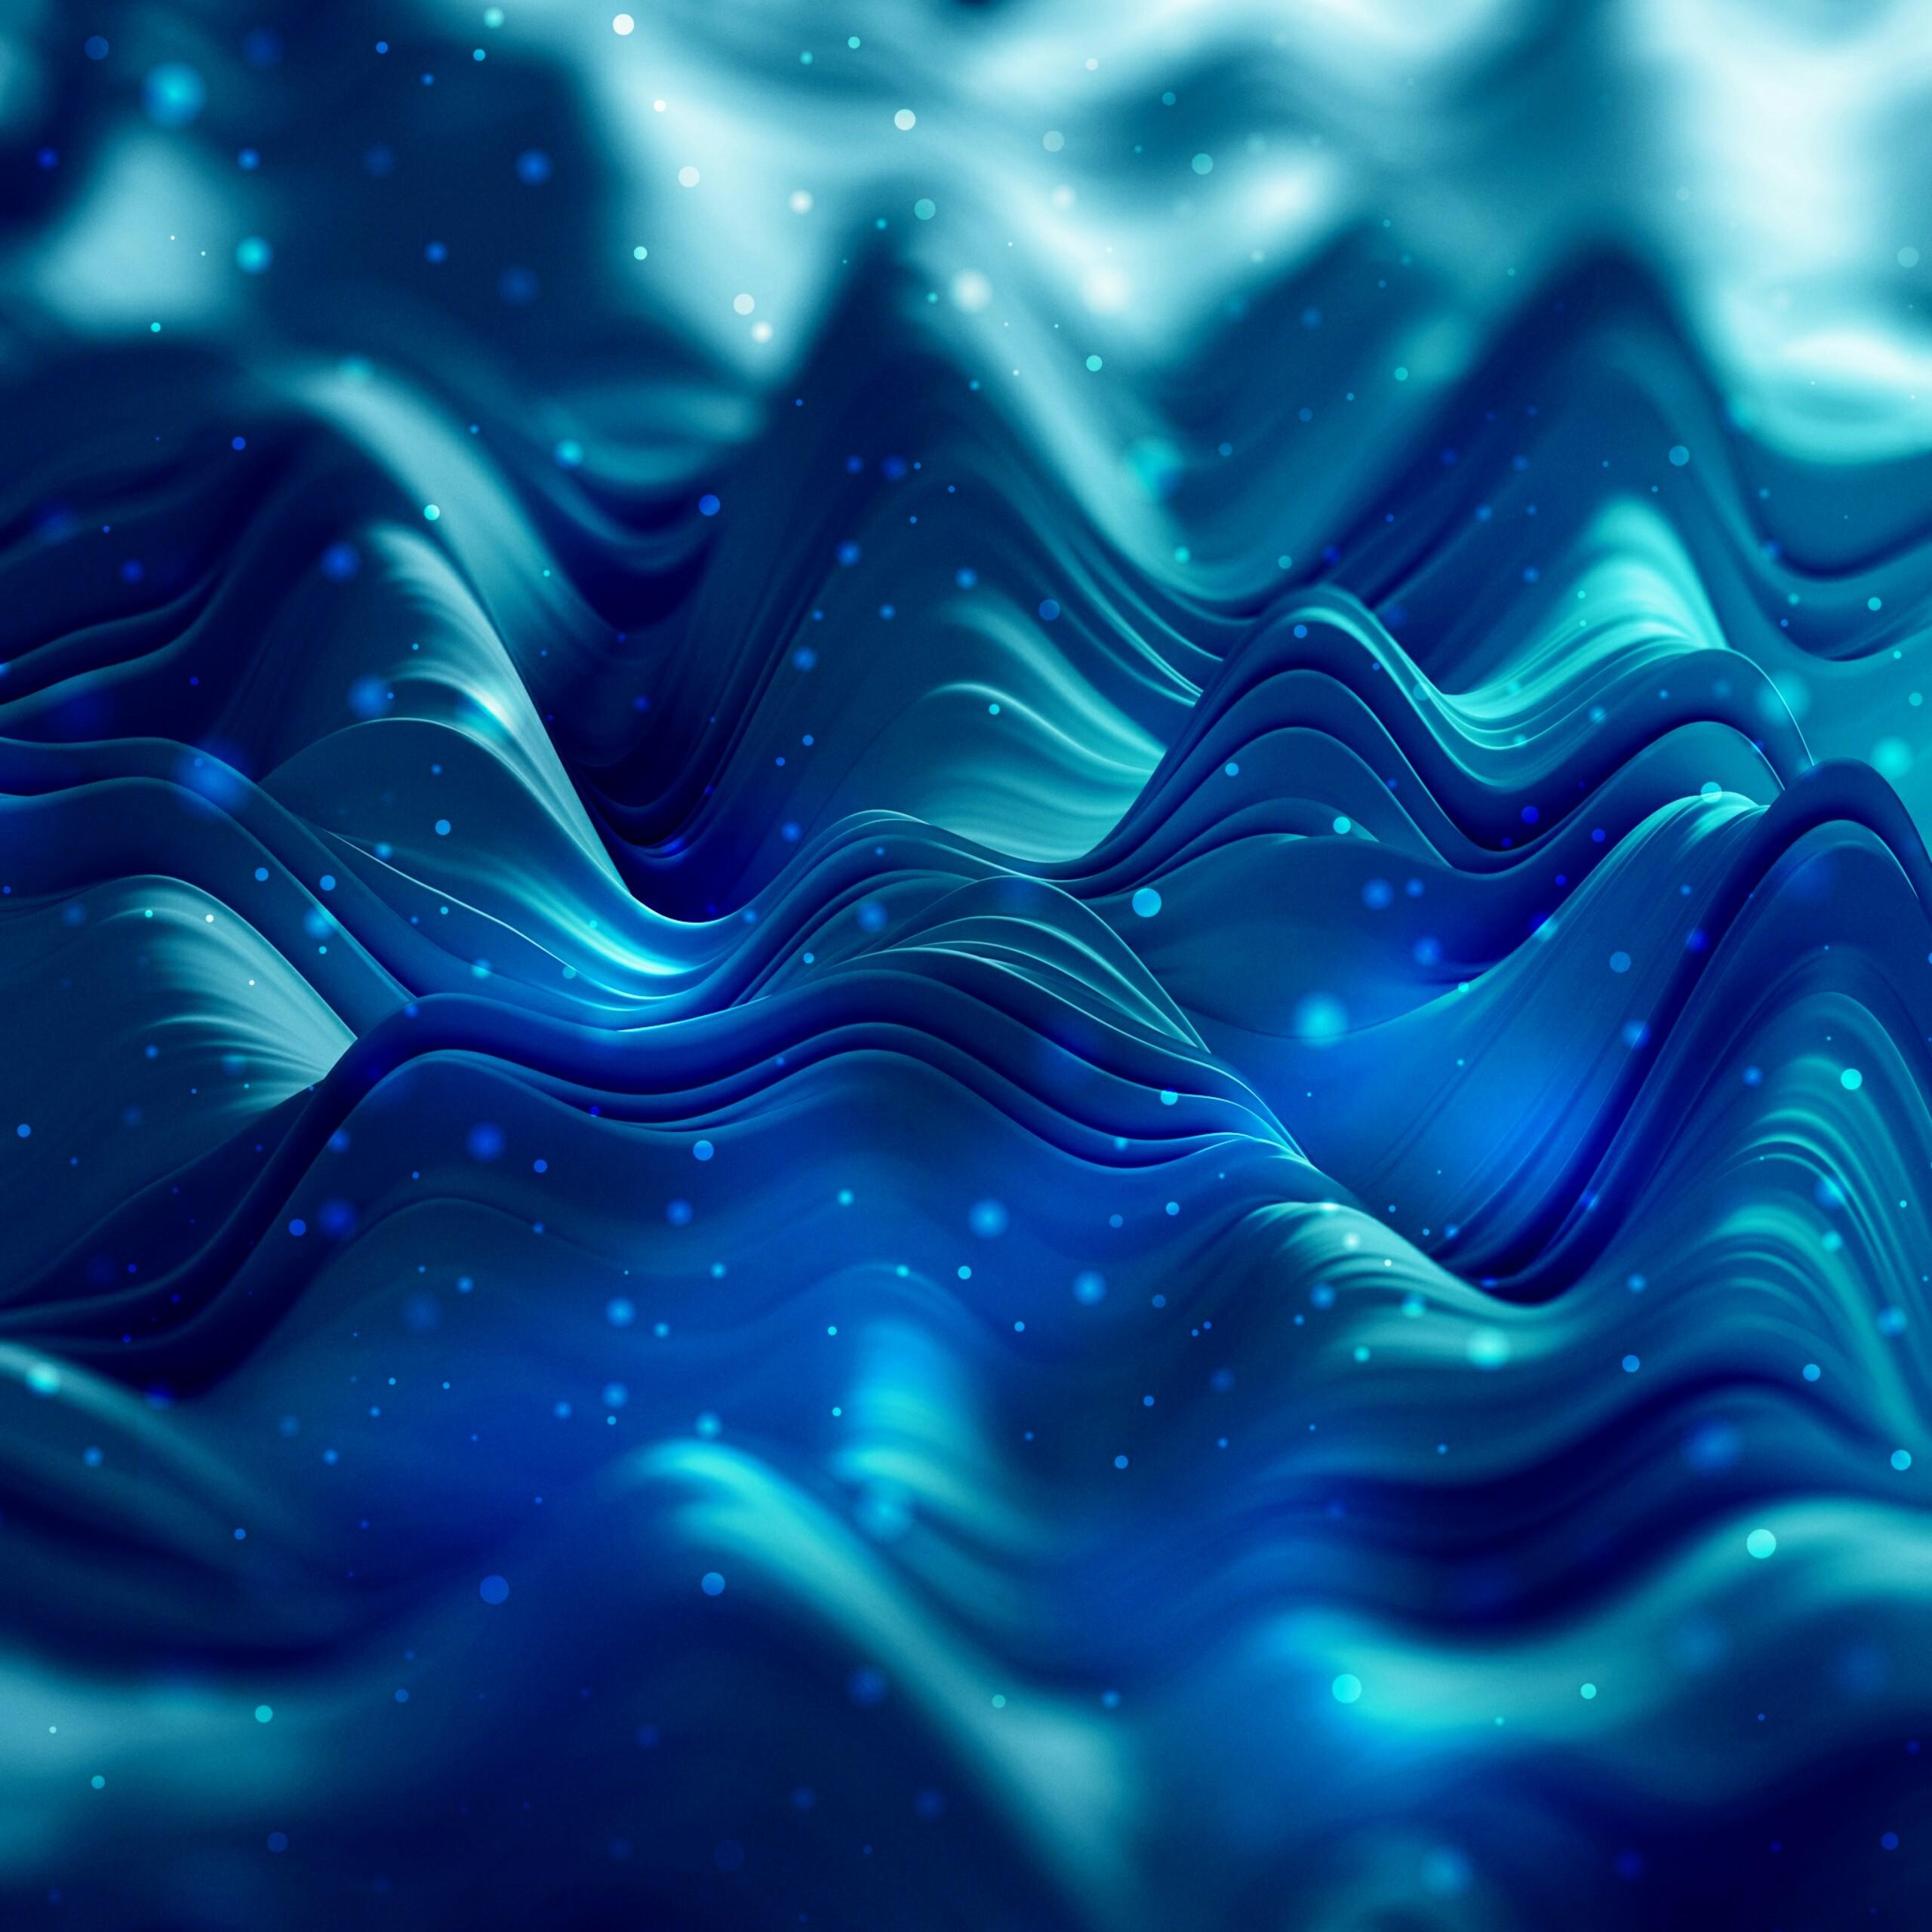 Abstract Waves In 3D Abstract QHD Wallpaper